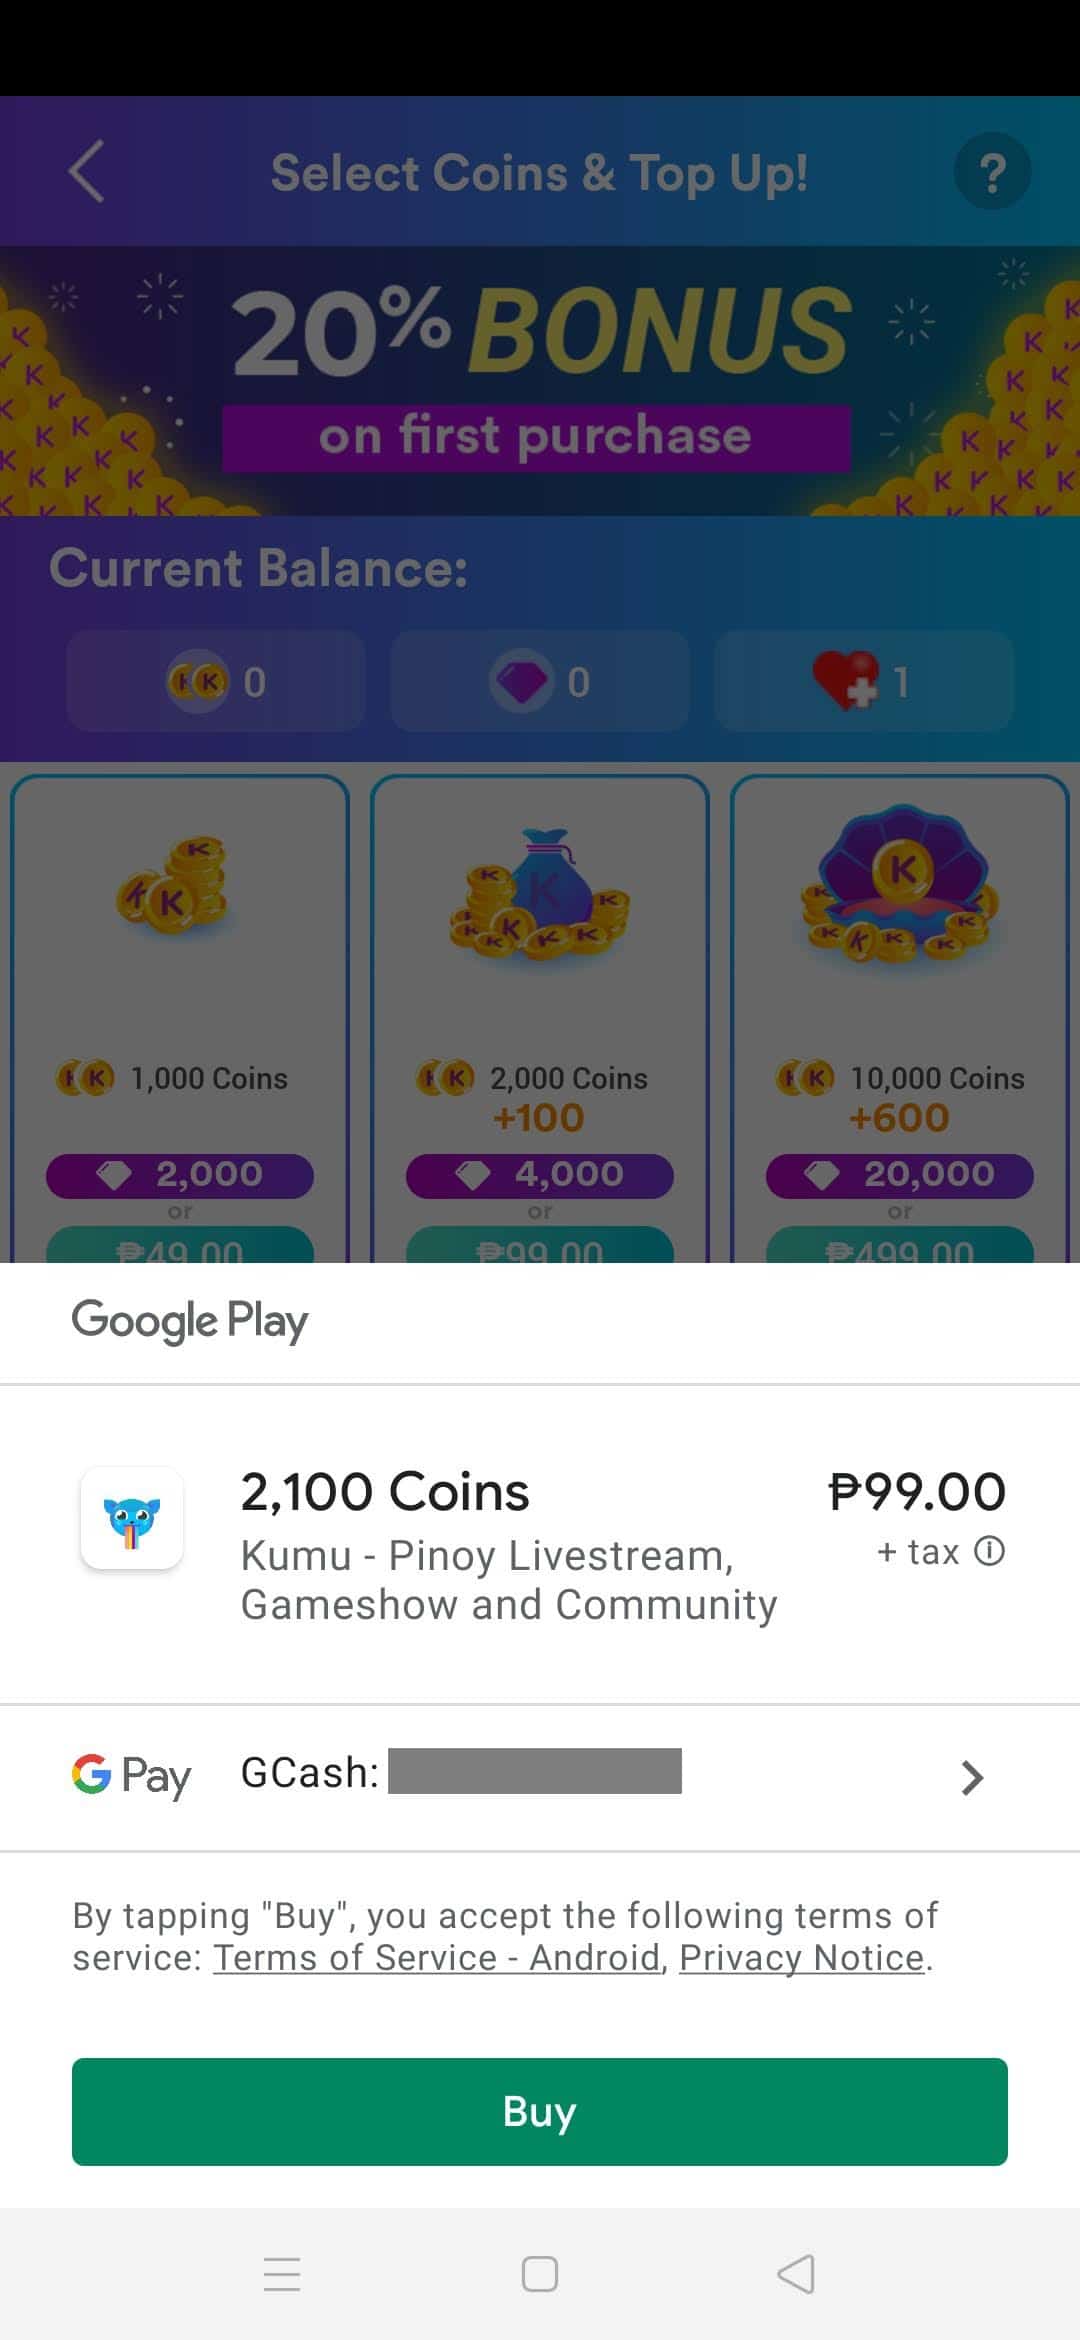 How to Buy Kumu Coins using GCash (to Vote in PBB or to